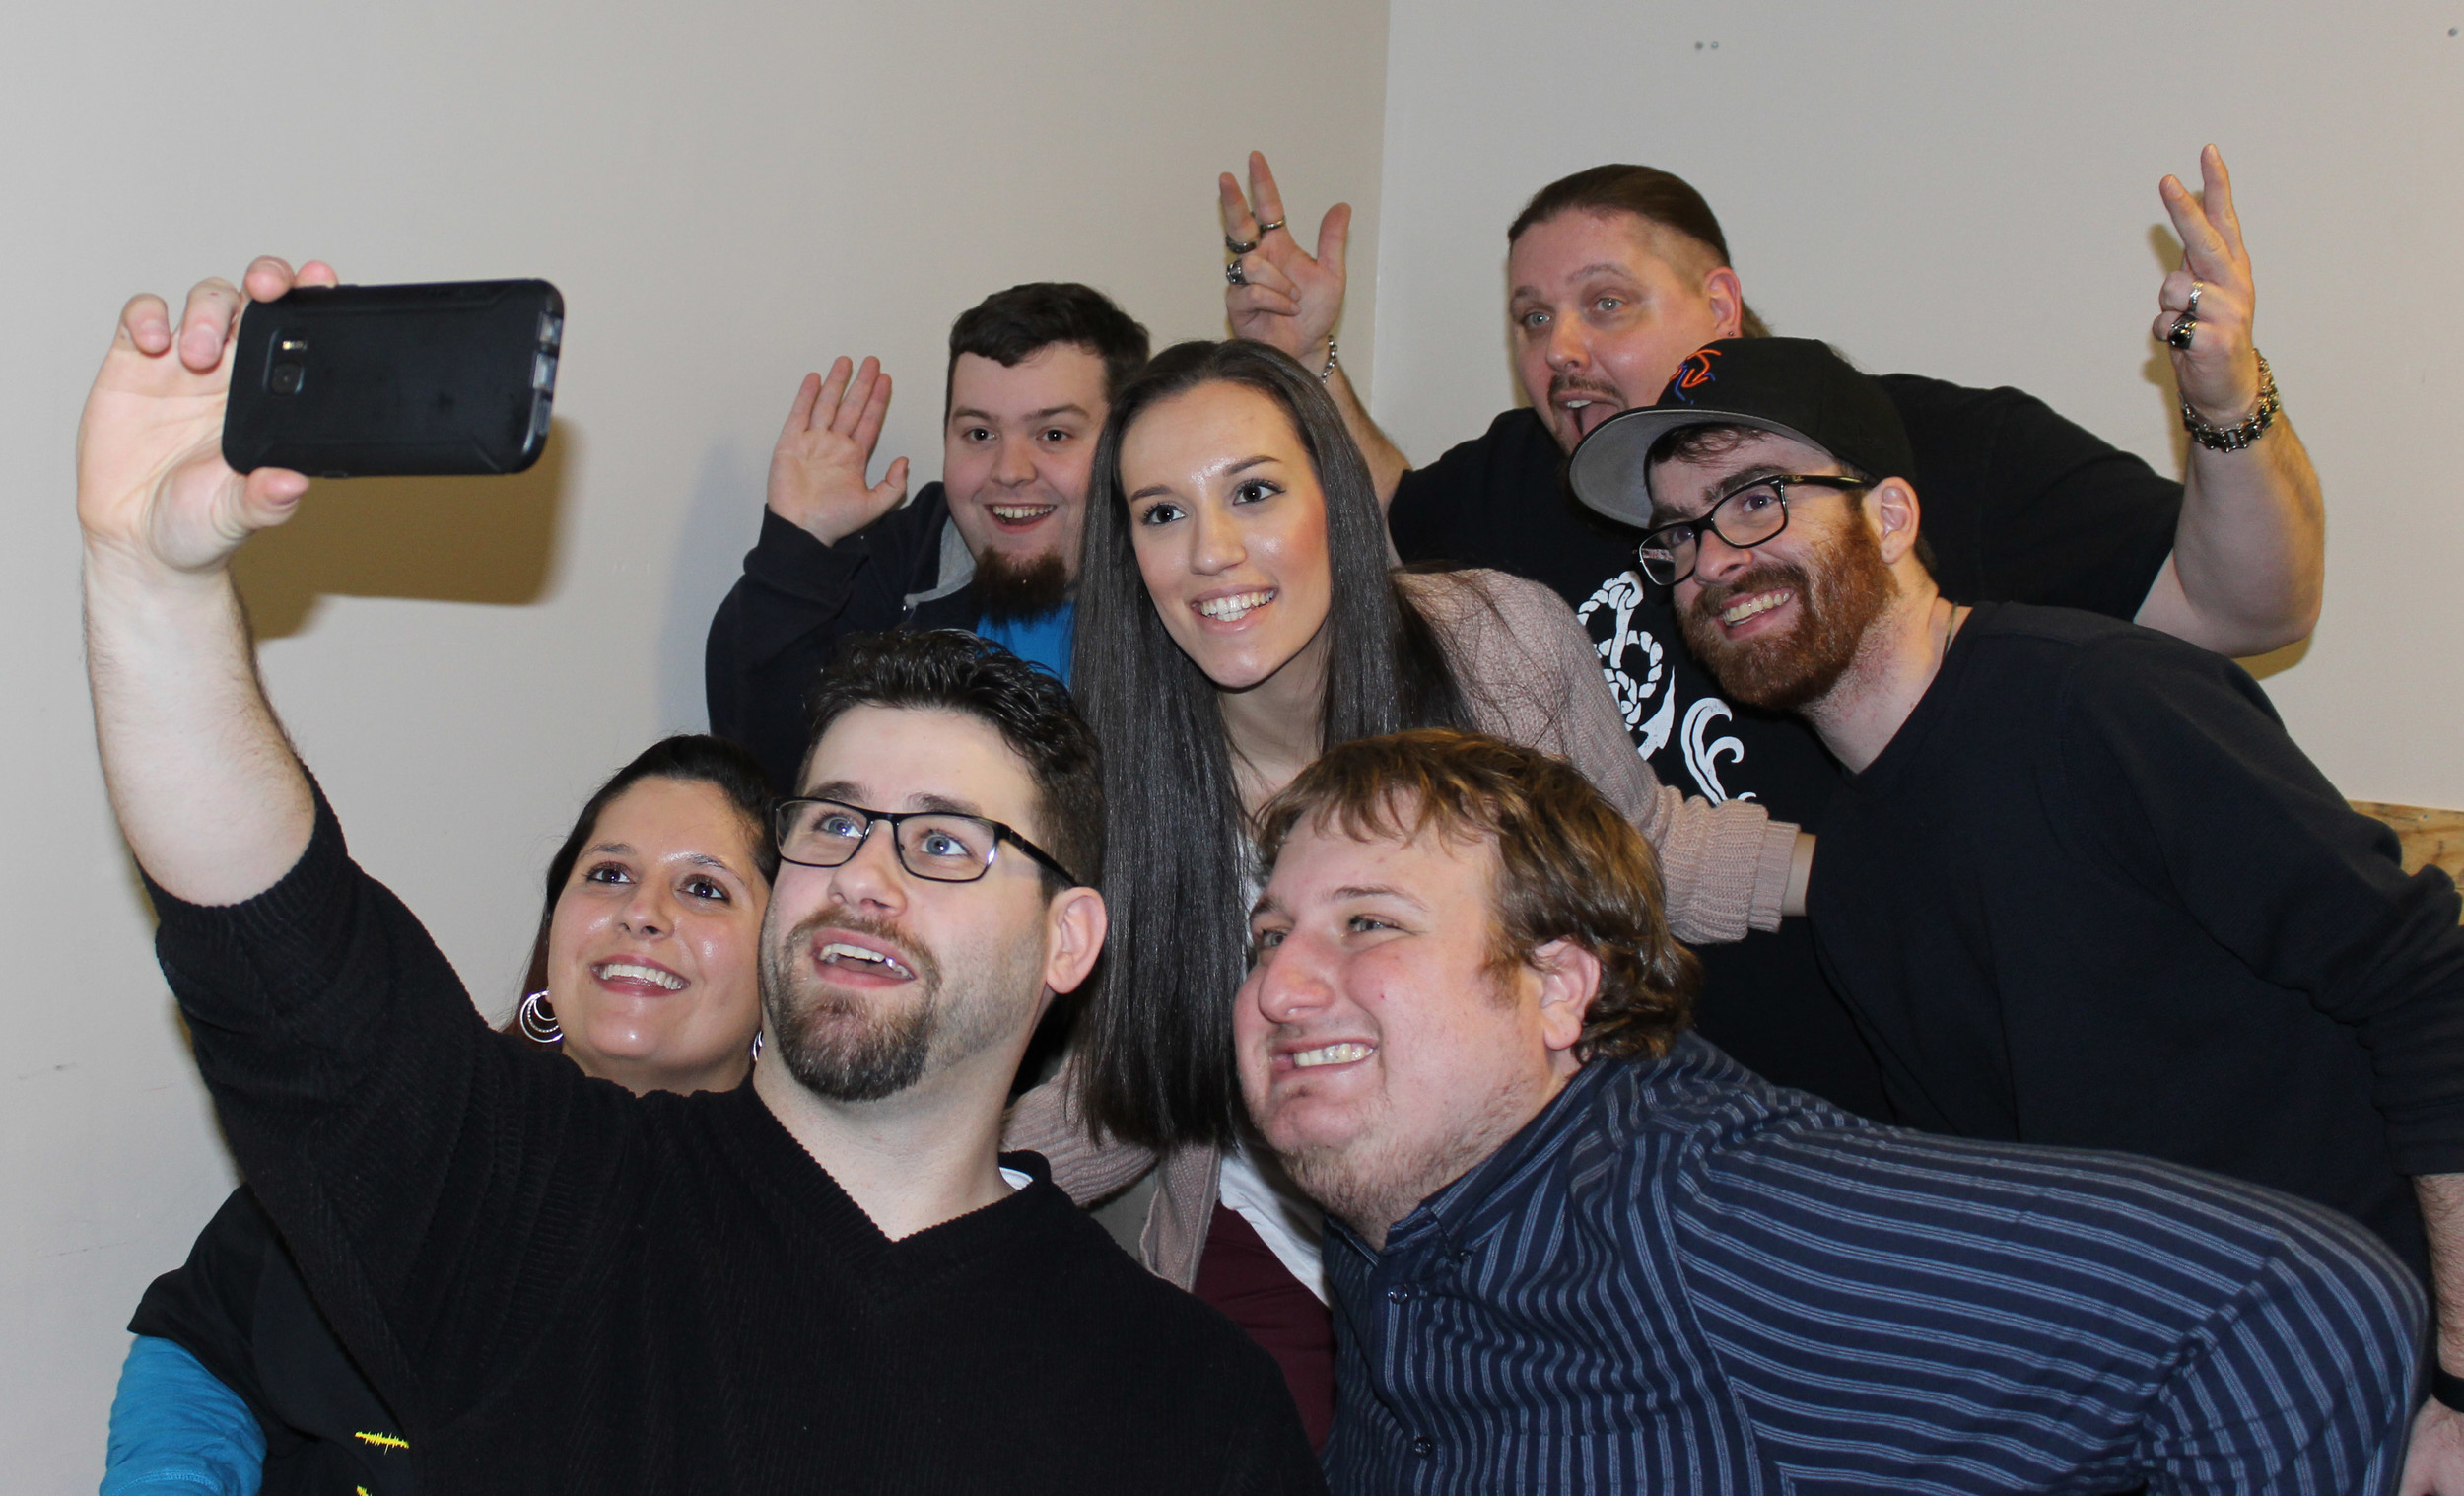 Grindhouse Radio cast members and friends, posing for a group selfie, included Jenna Leonardi, far left; co-host Stephen Zambito, 25, of Stony Brook; Kevin Dempsey, 26, of Bay Shore; co-host Kim Adragna, 22, of Merrick; Steve Eisenberg; co-host William Kucmierowski, 42, of Levittown; and Tom Greer, of West Babylon.